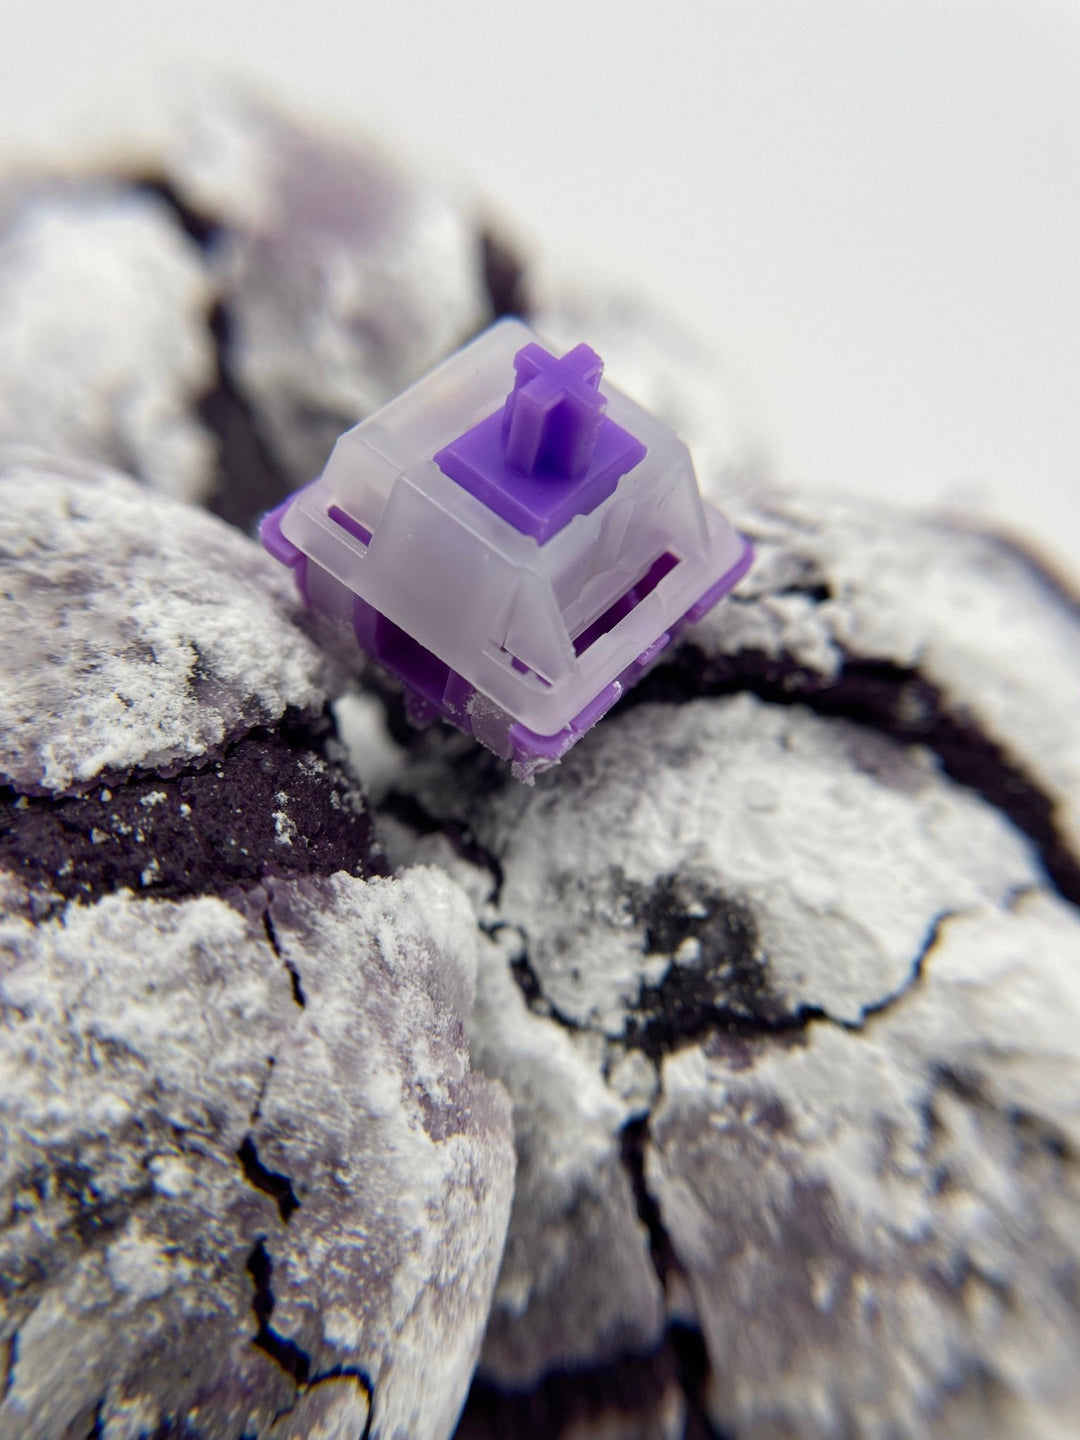 KNC Keys Ube Crinkle Cookies Light Tactile Switches